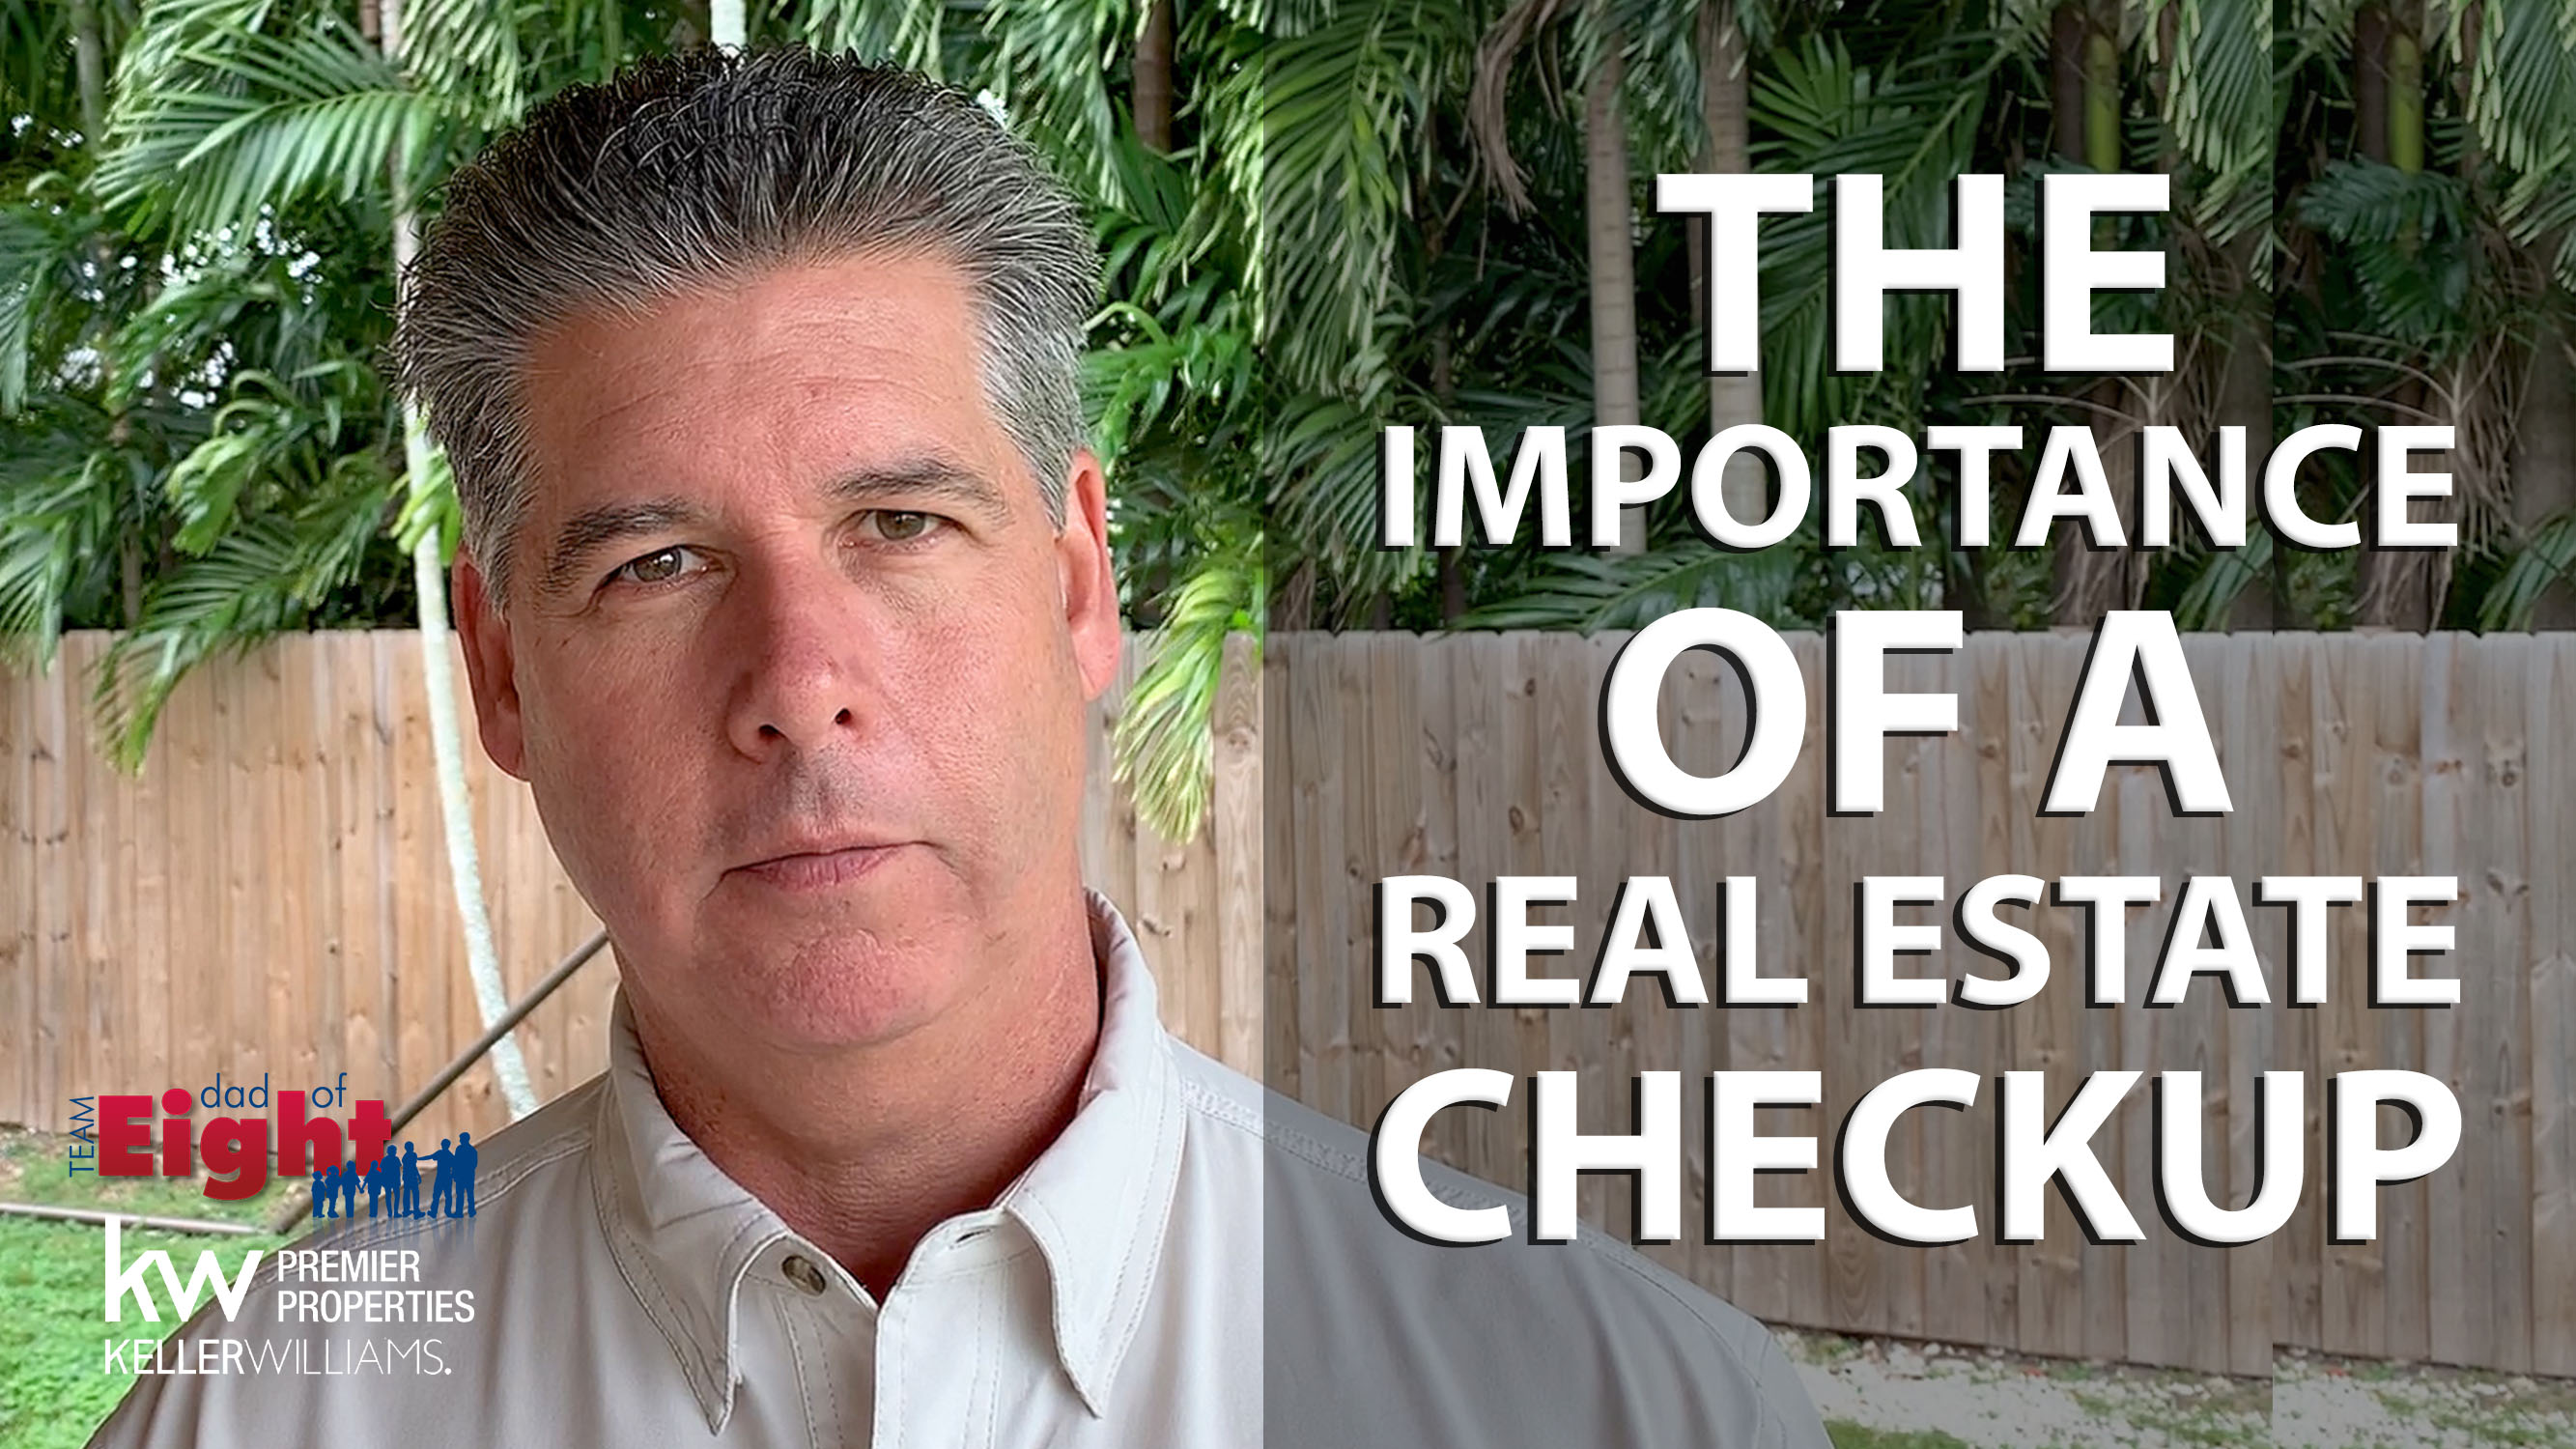 Q: Have You Had Your Real Estate Checkup Yet?